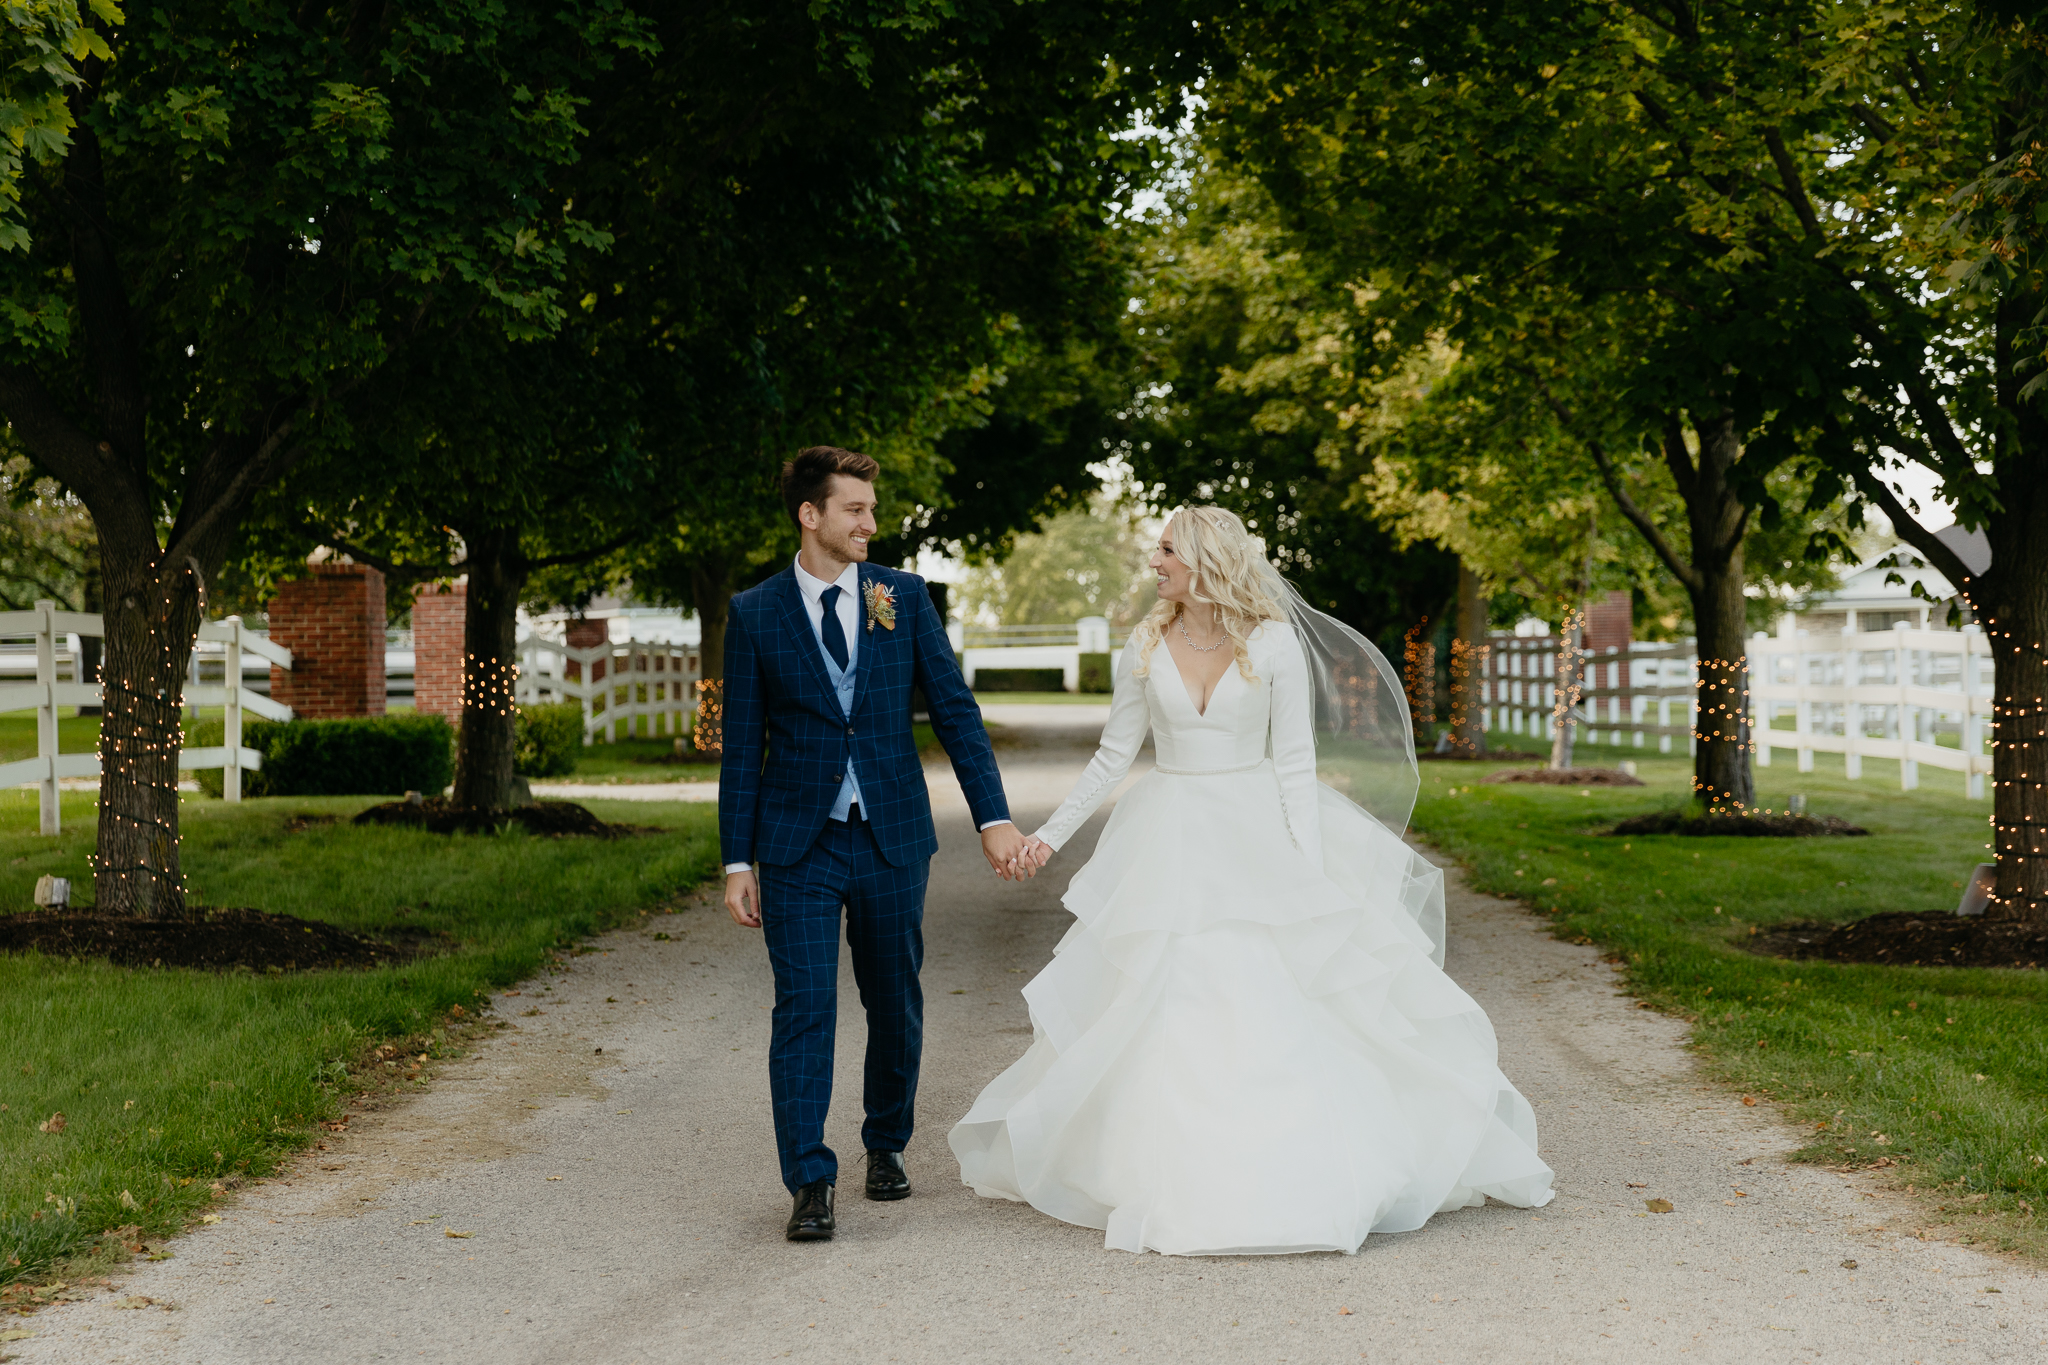 Bride and groom walk down tree lined driveway hand in hand